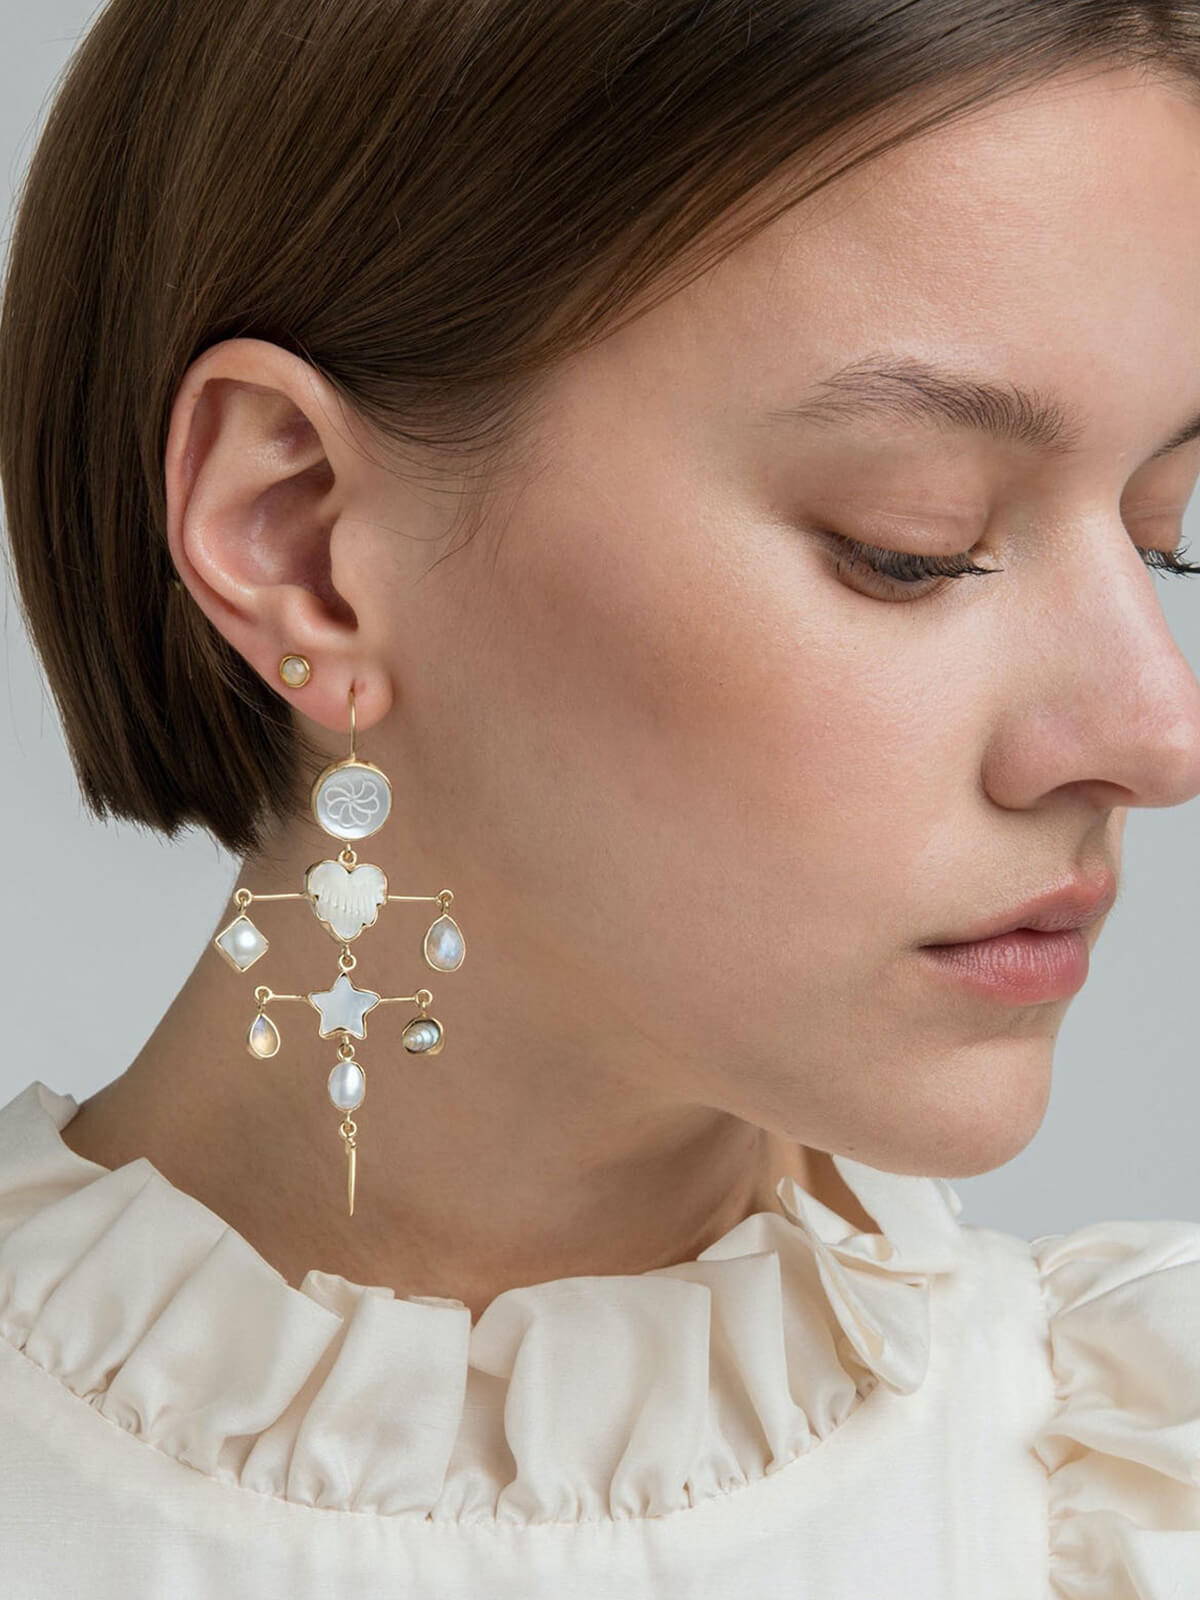 A model wearing the Grainne Morton Layered with Victorian Drop Pearl Earrings.